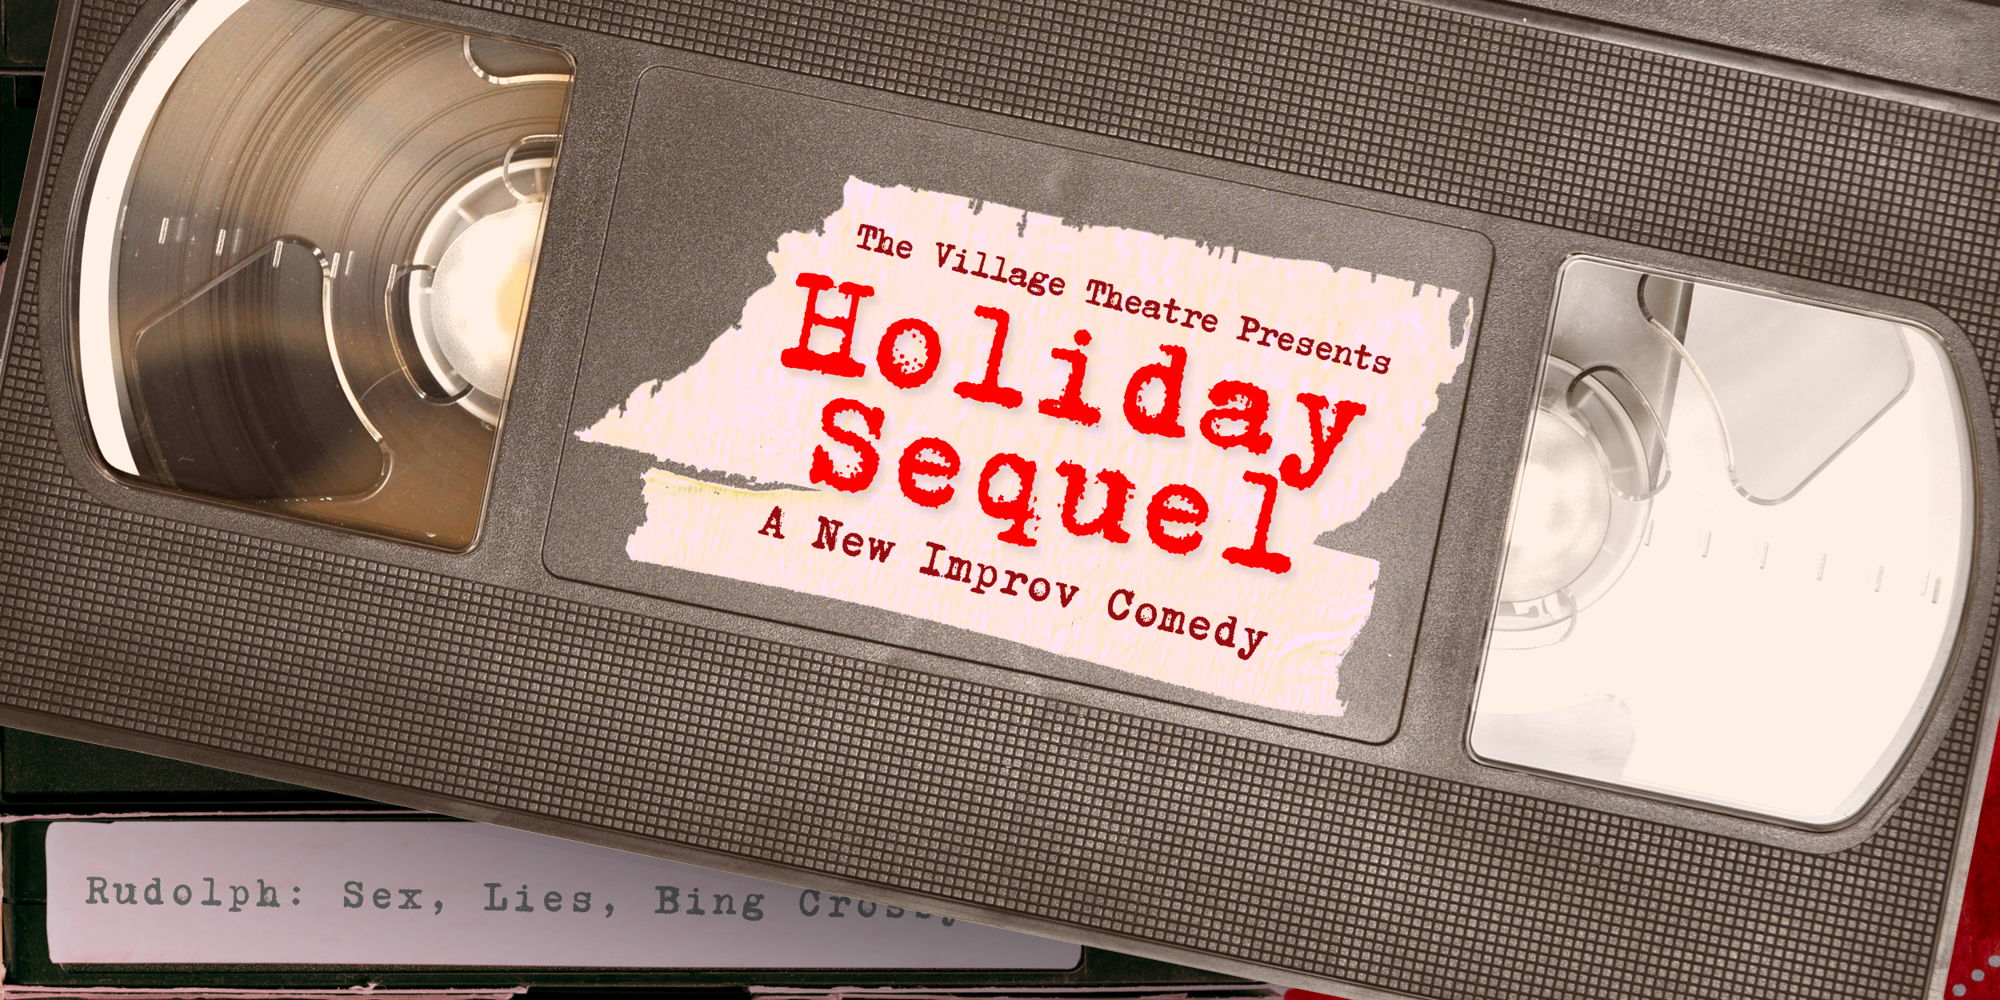 Holiday Sequel: A New Improv Comedy promotional image